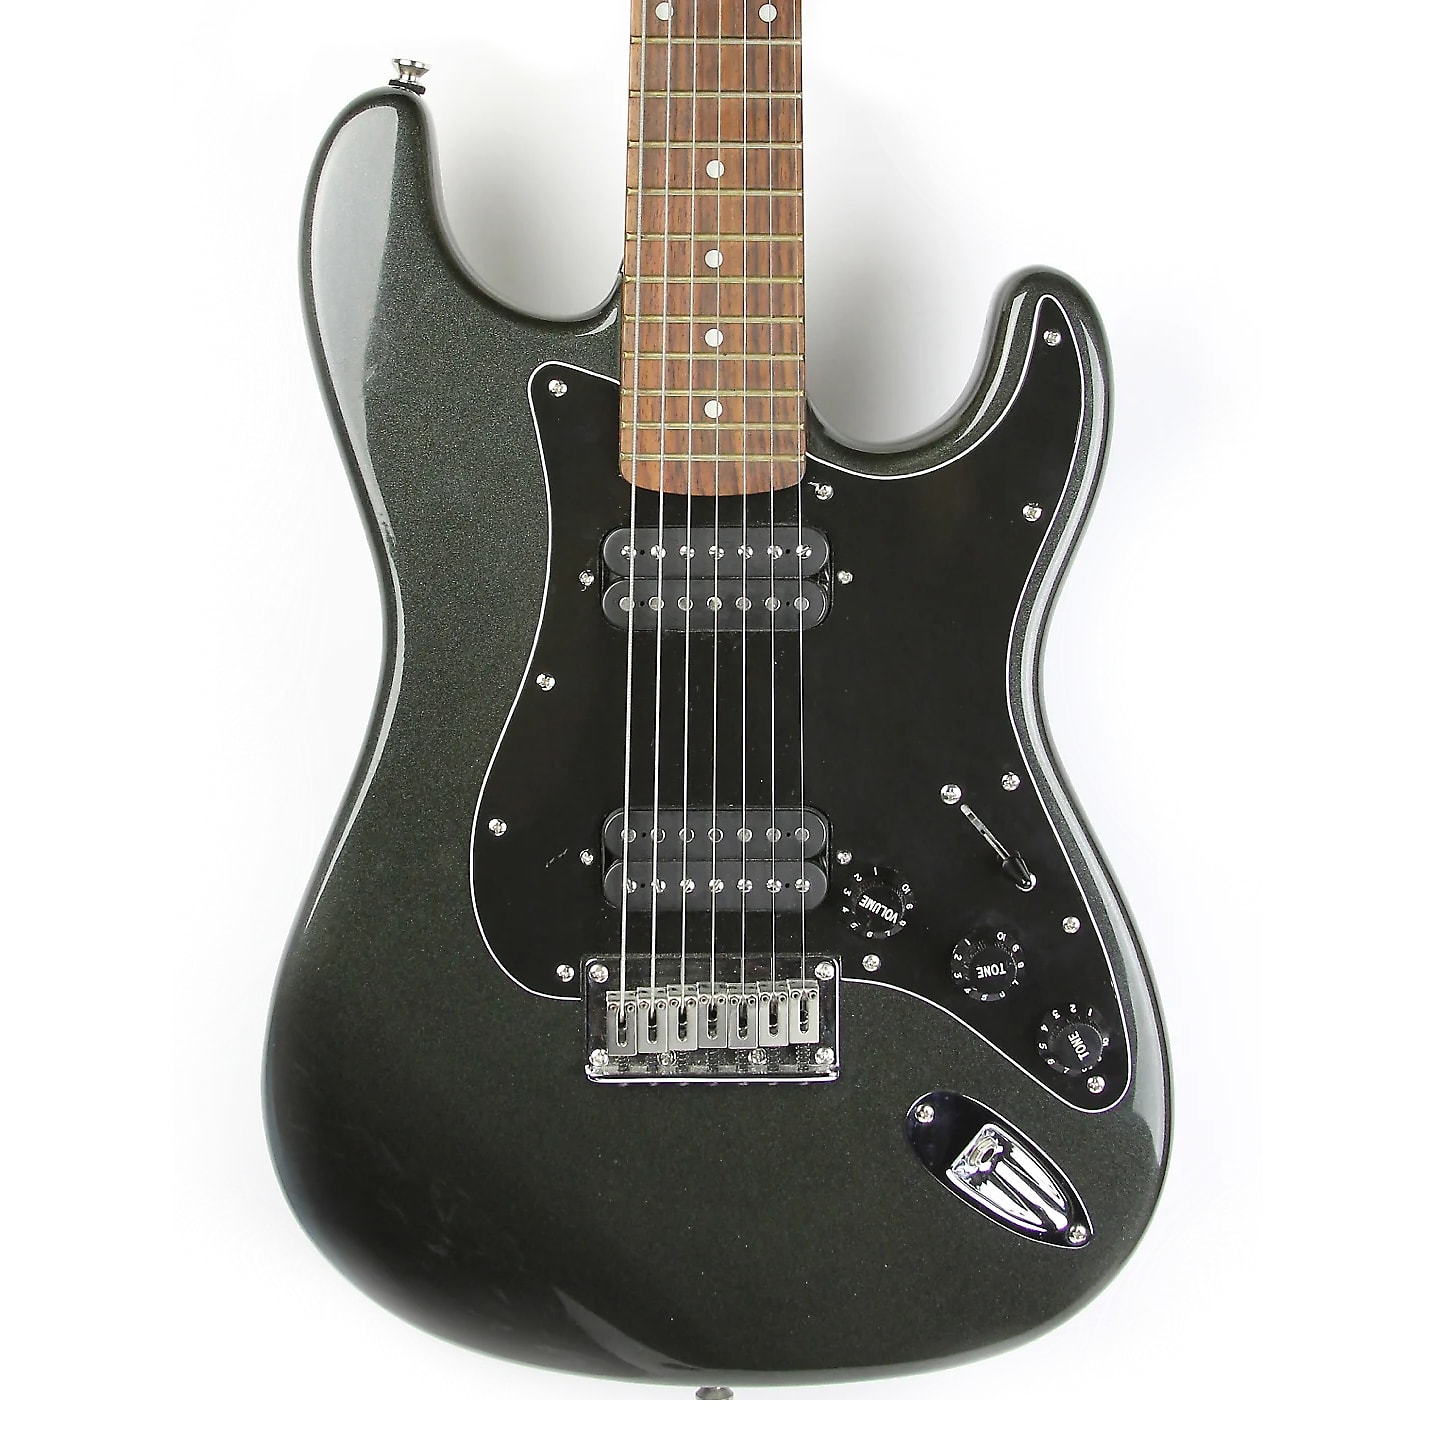 Squier by Fender Standard Fat Strato ギター SALE - ギター